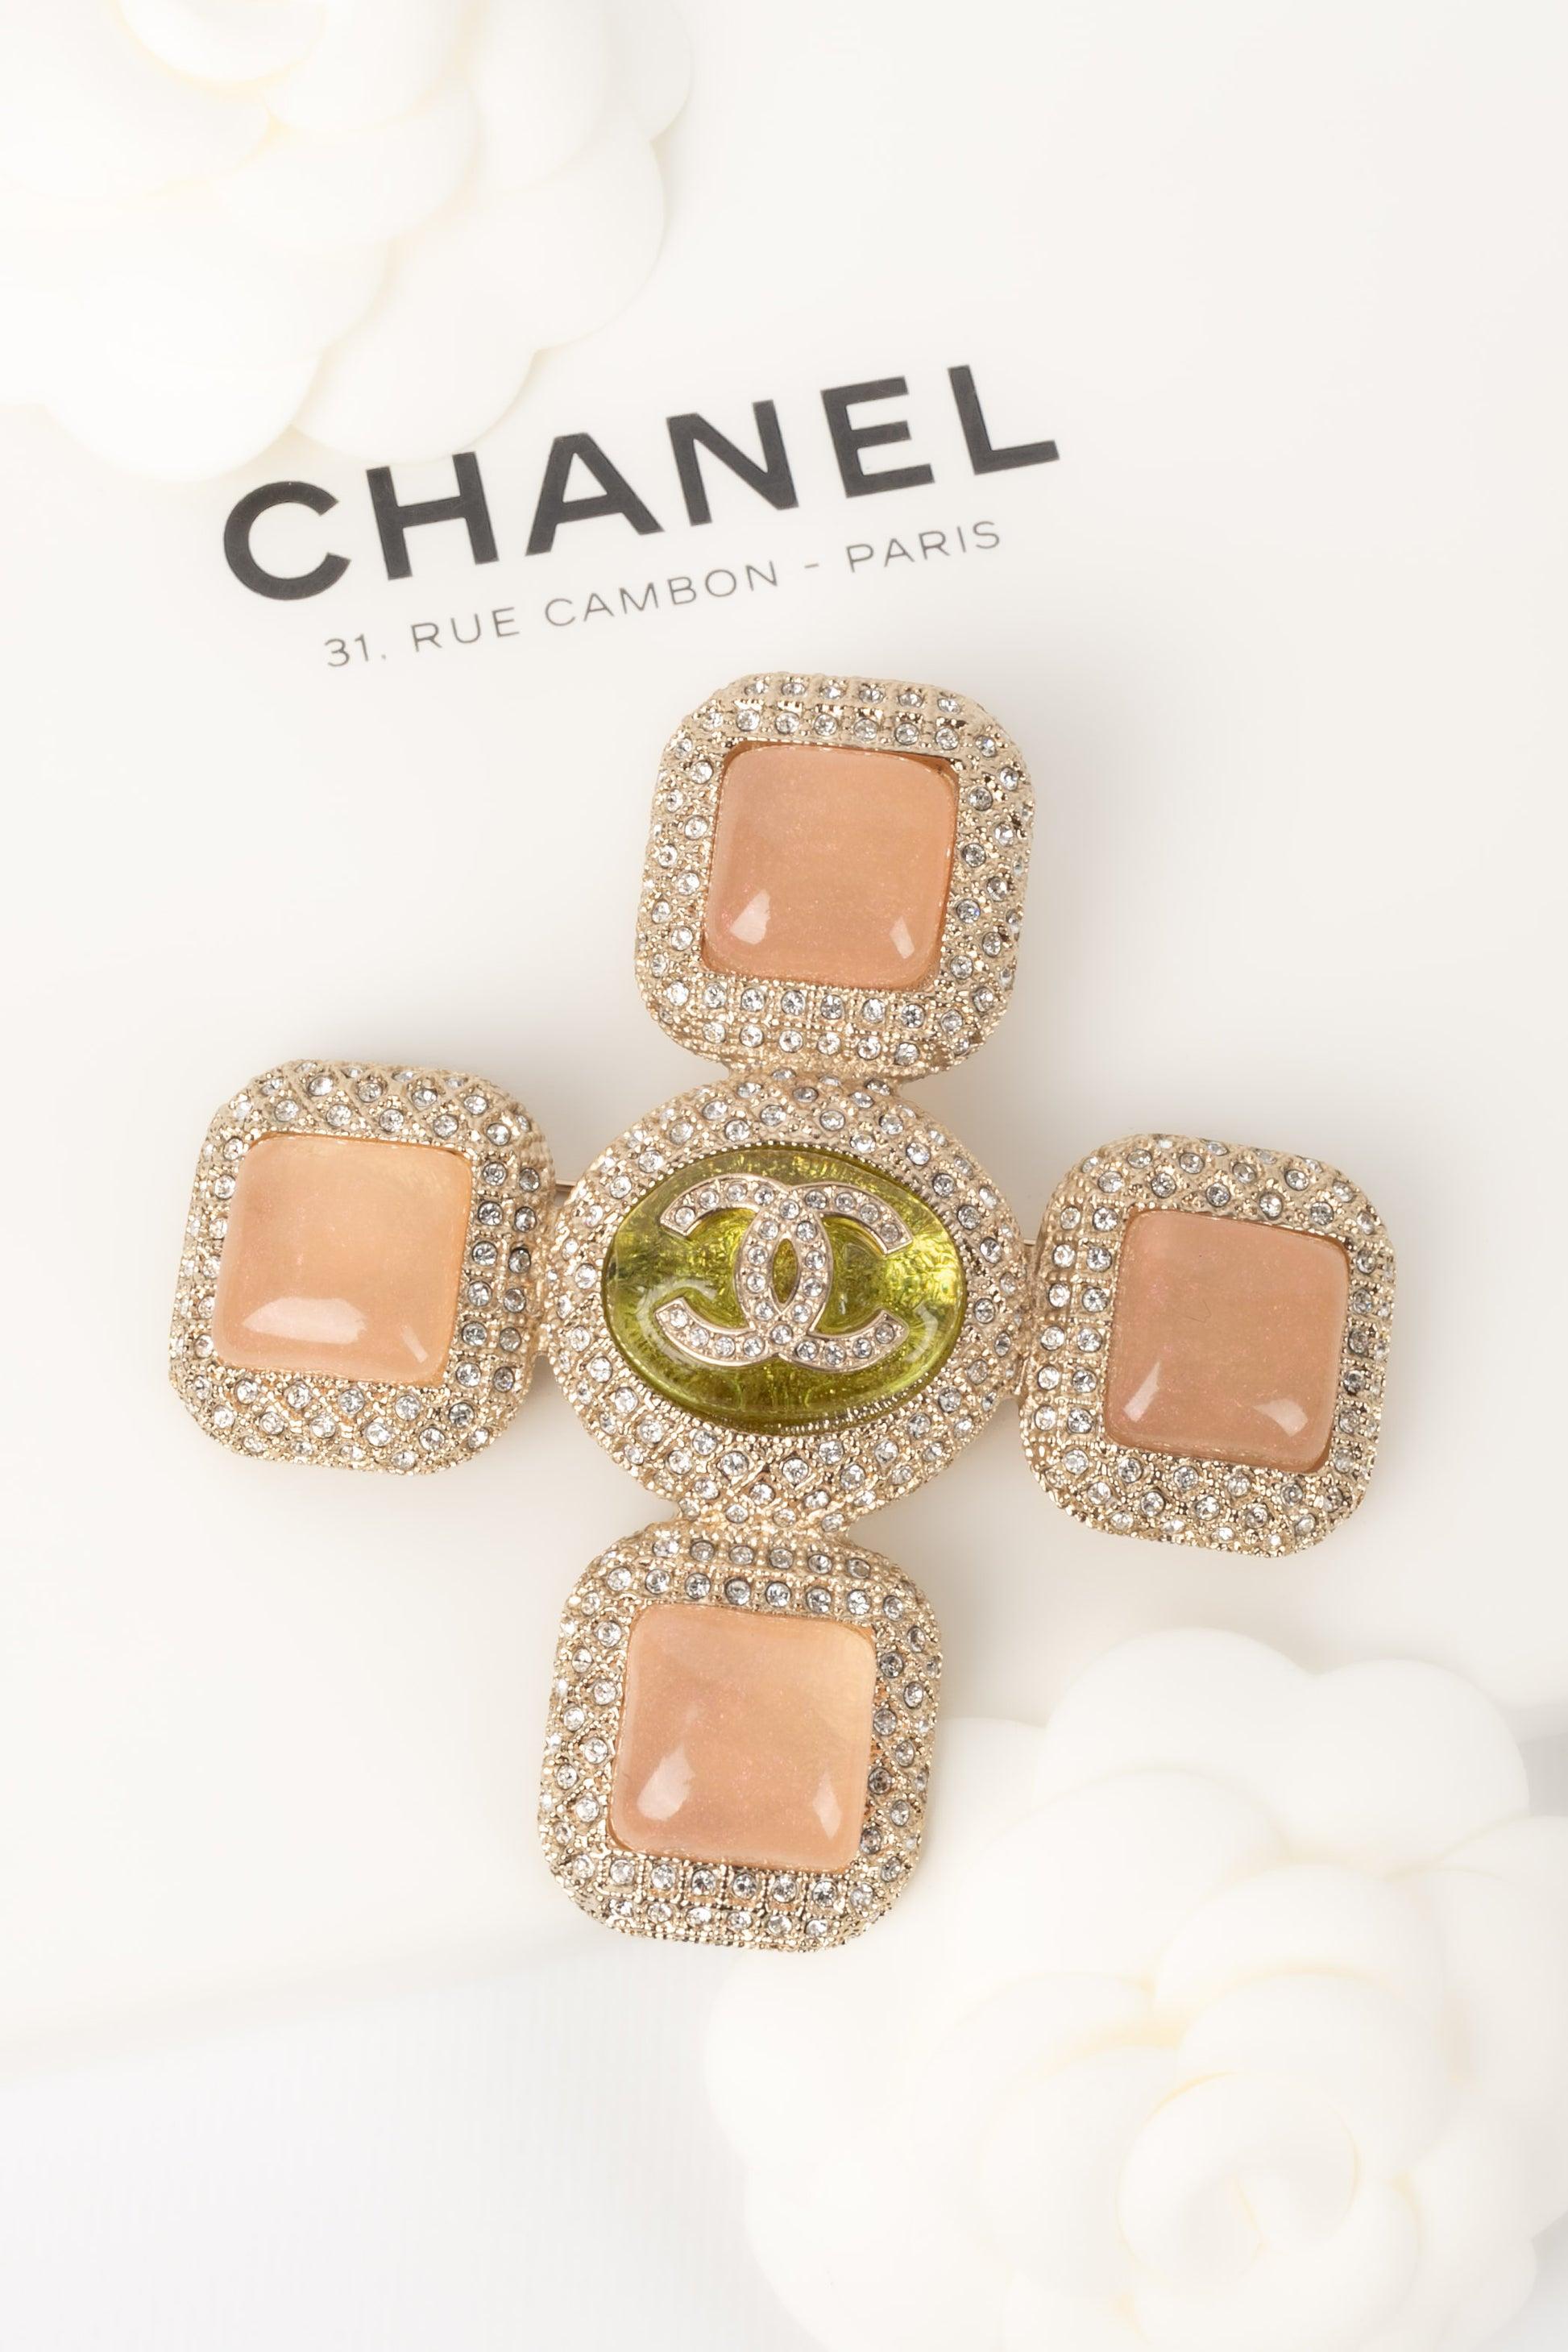 Chanel - (Made in France) Champagne metal brooch ornamented with rhinestones and resin. Fall/Winter 2020 Collection.

Additional information:
Condition: Very good condition
Dimensions: Height: 8.5 cm - Width: 8.5 cm

Seller Reference: BRB138
